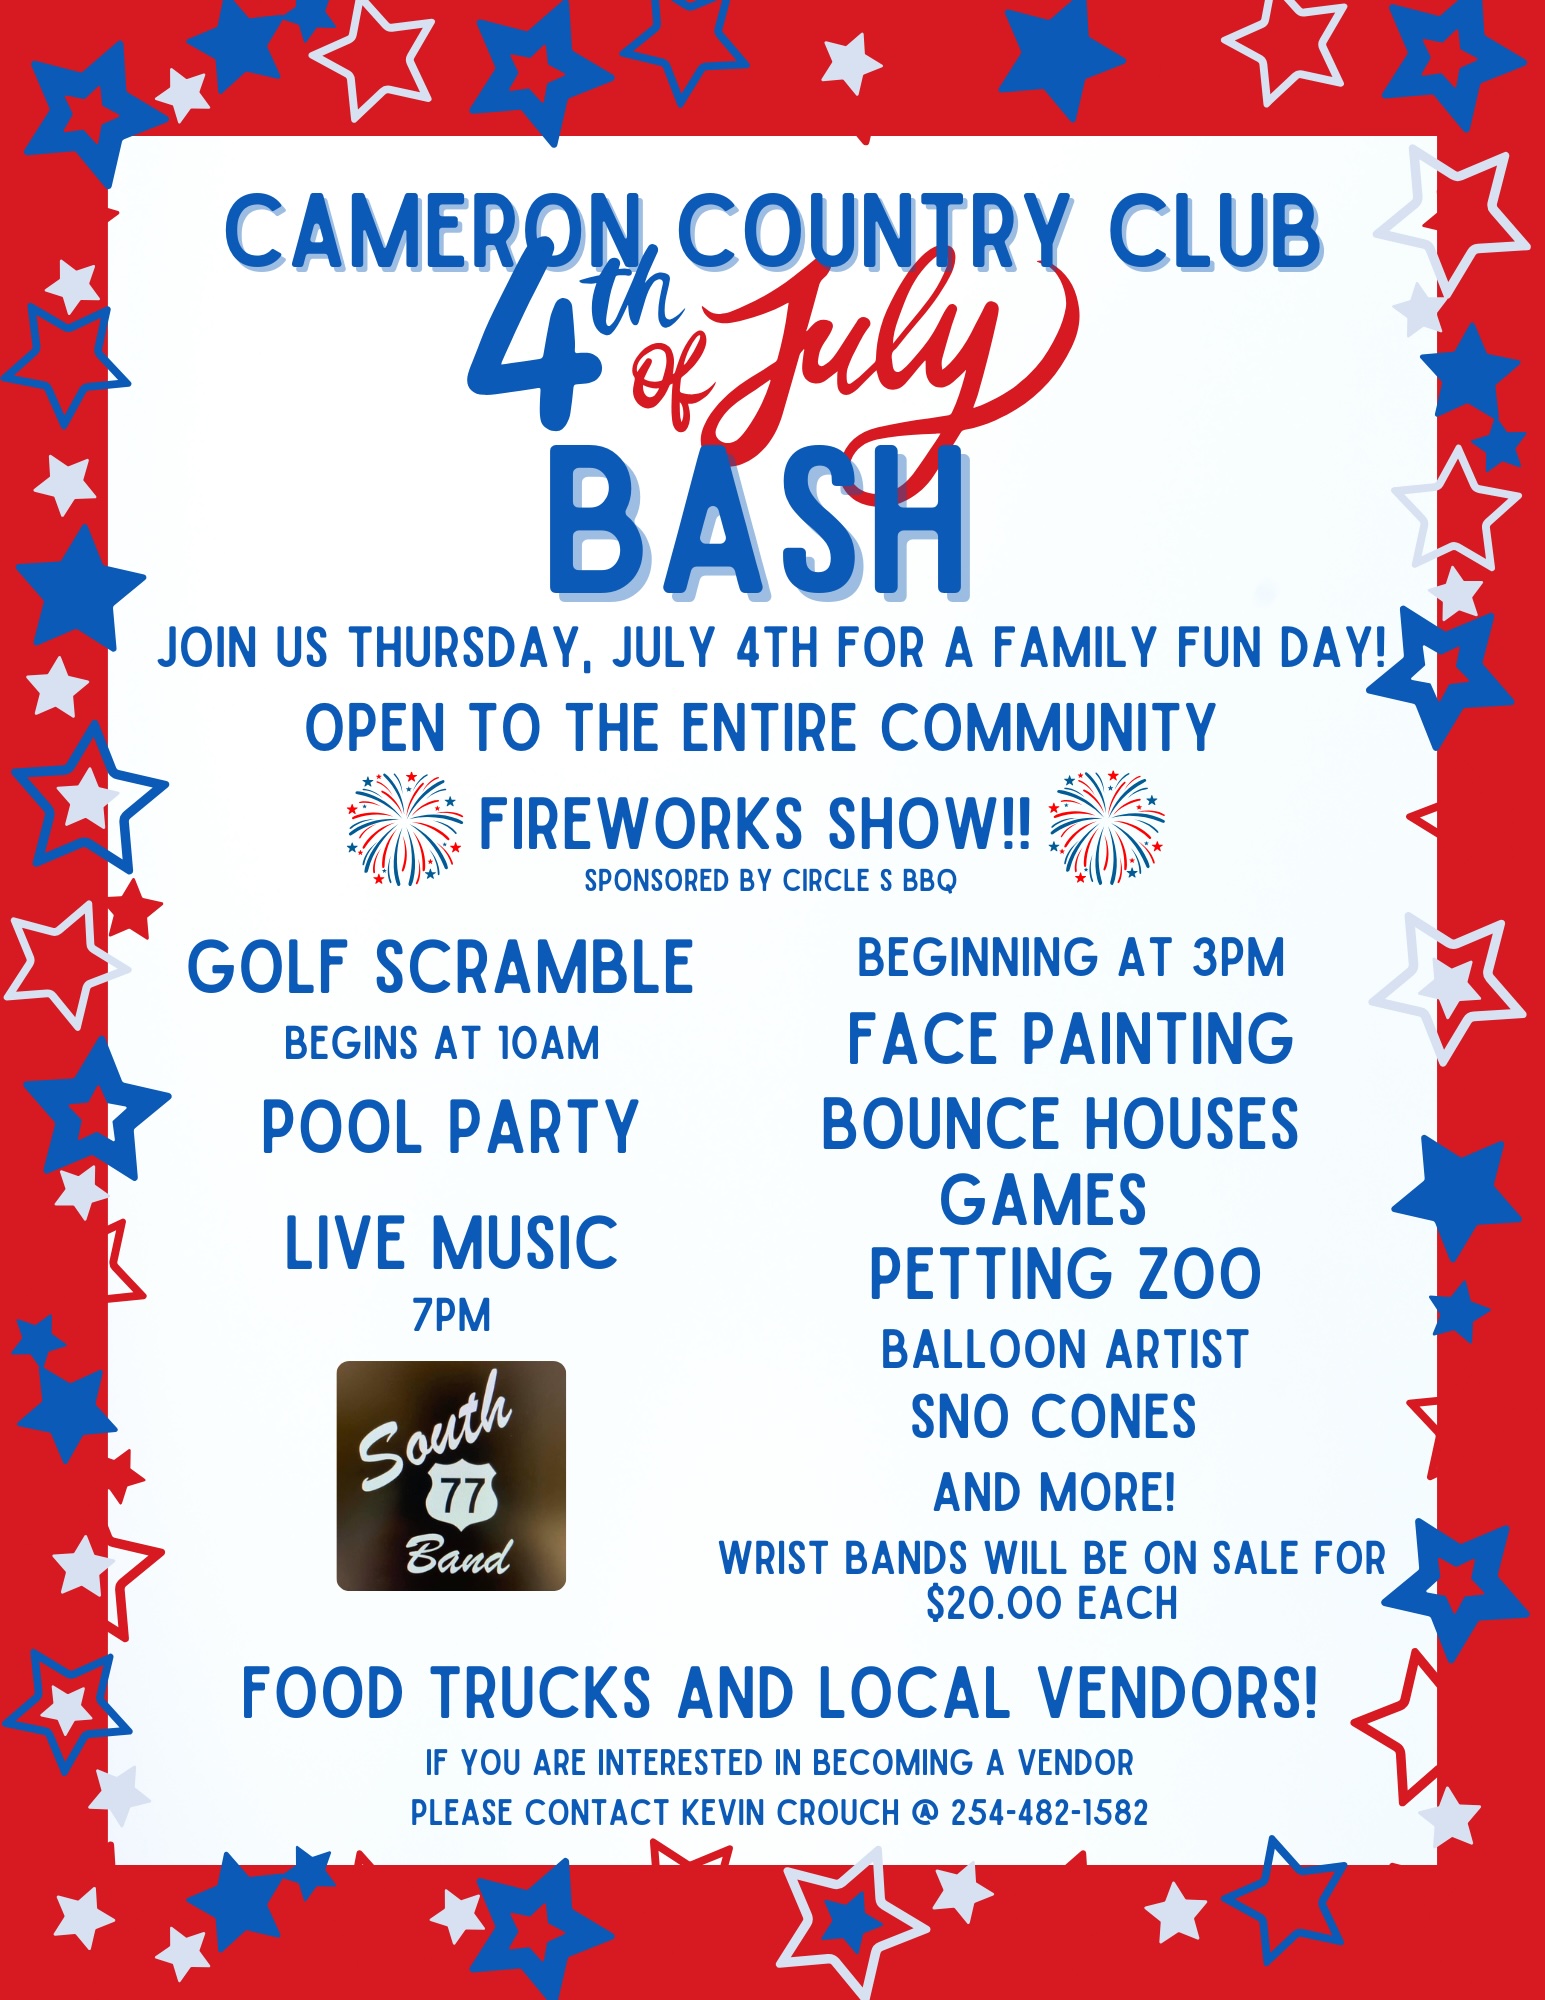 July 4th Cameron Country Club